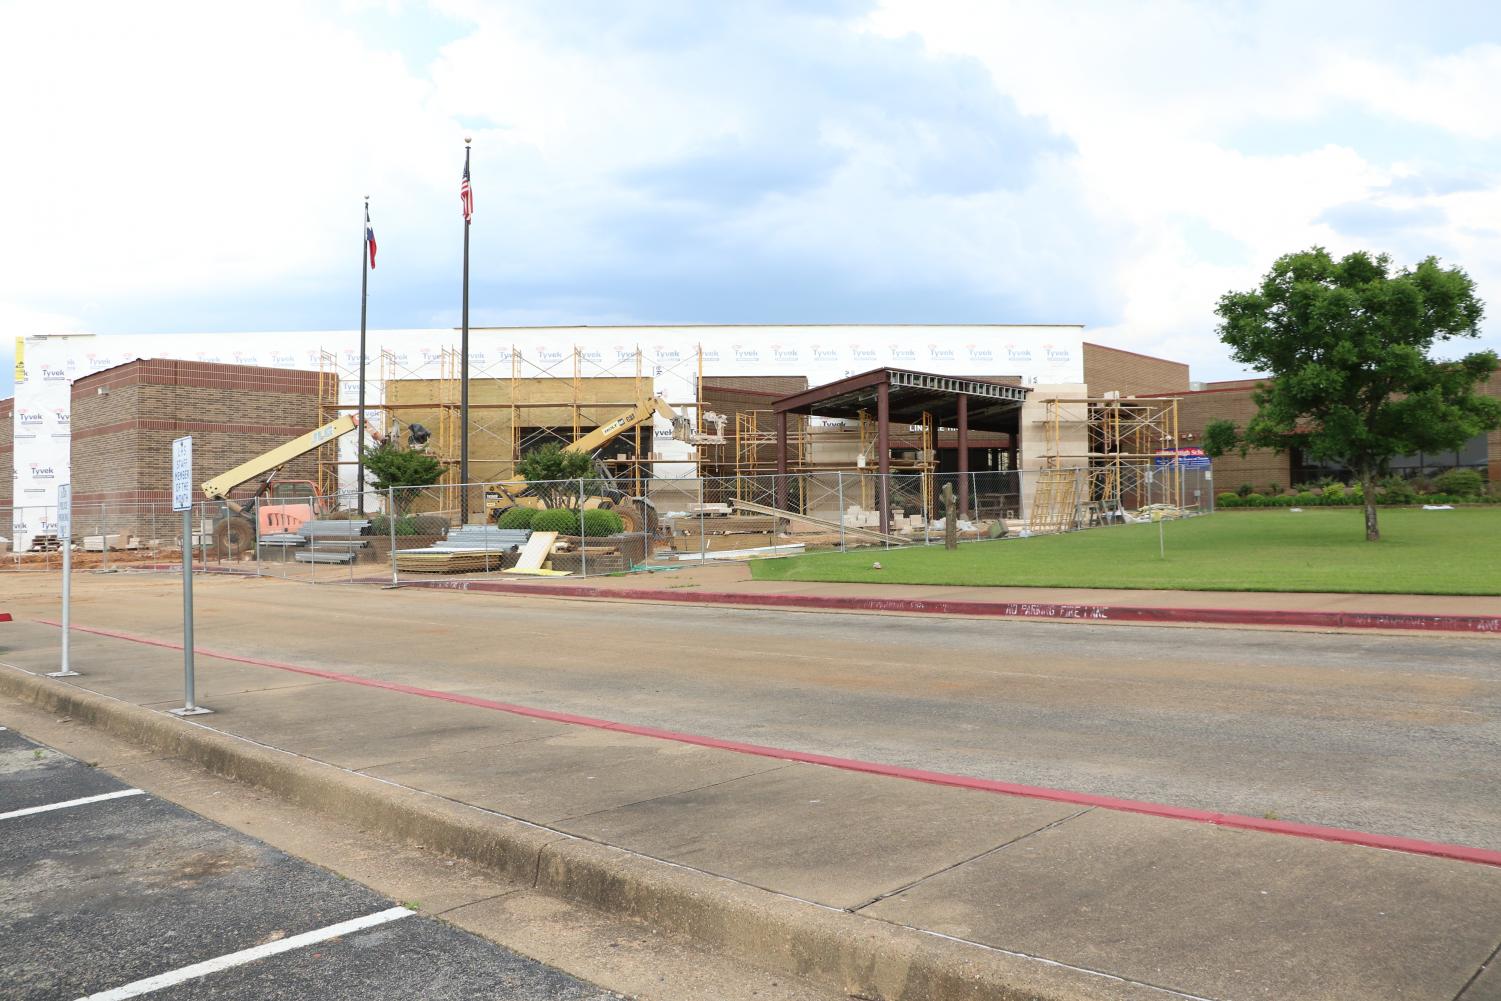 The front entrance of the highschool mid-construction. Bond construction is set to finish in August